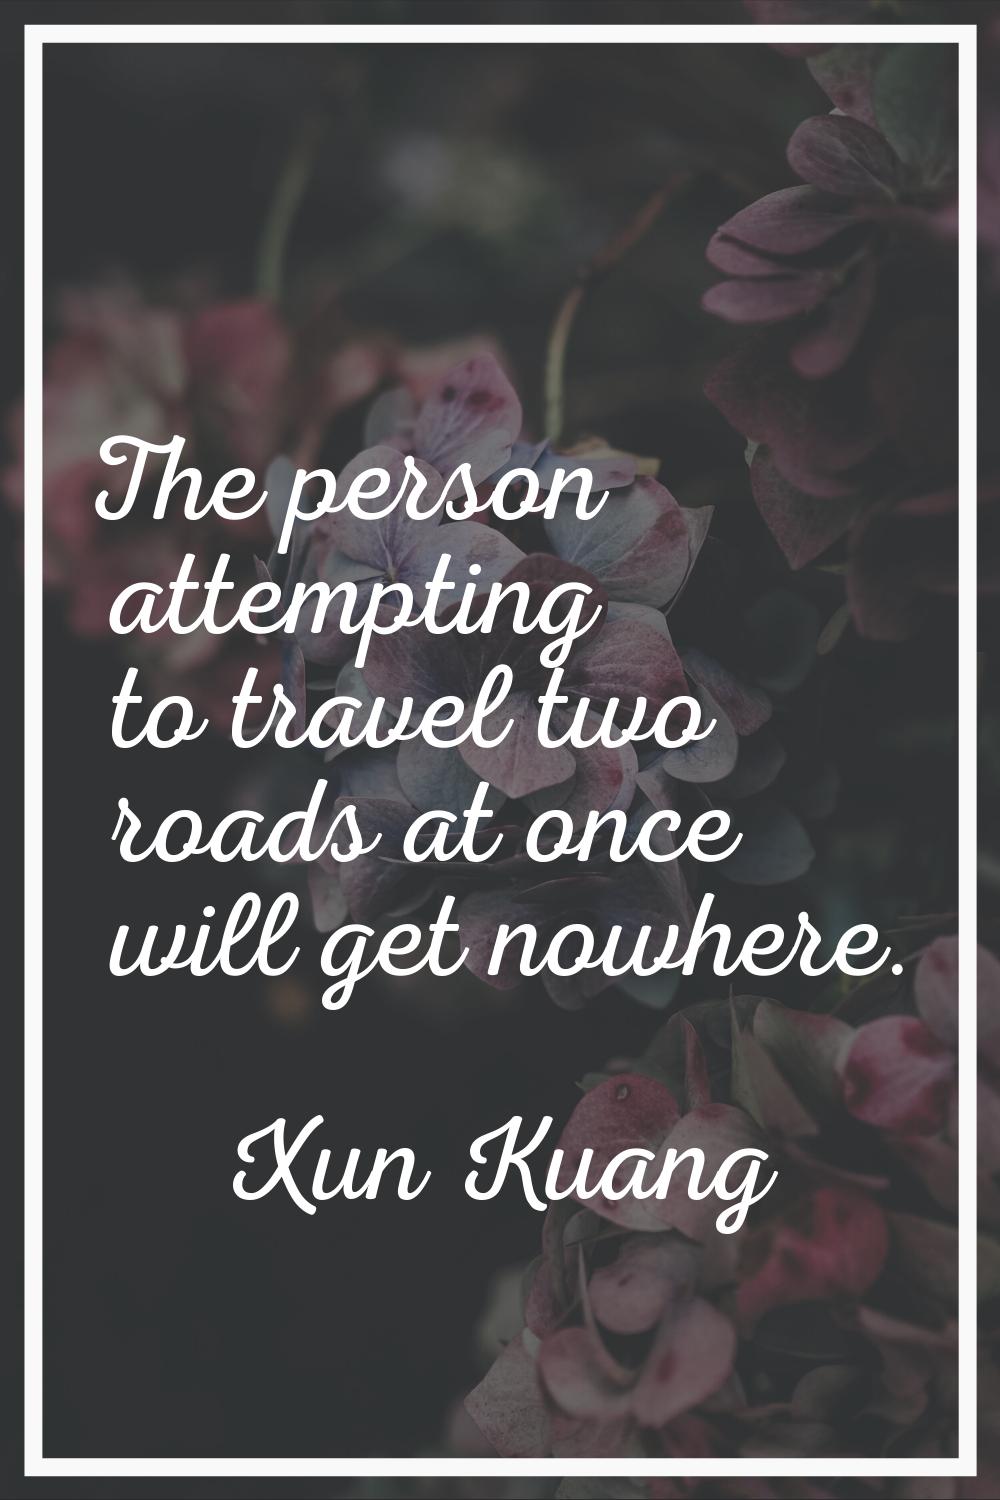 The person attempting to travel two roads at once will get nowhere.